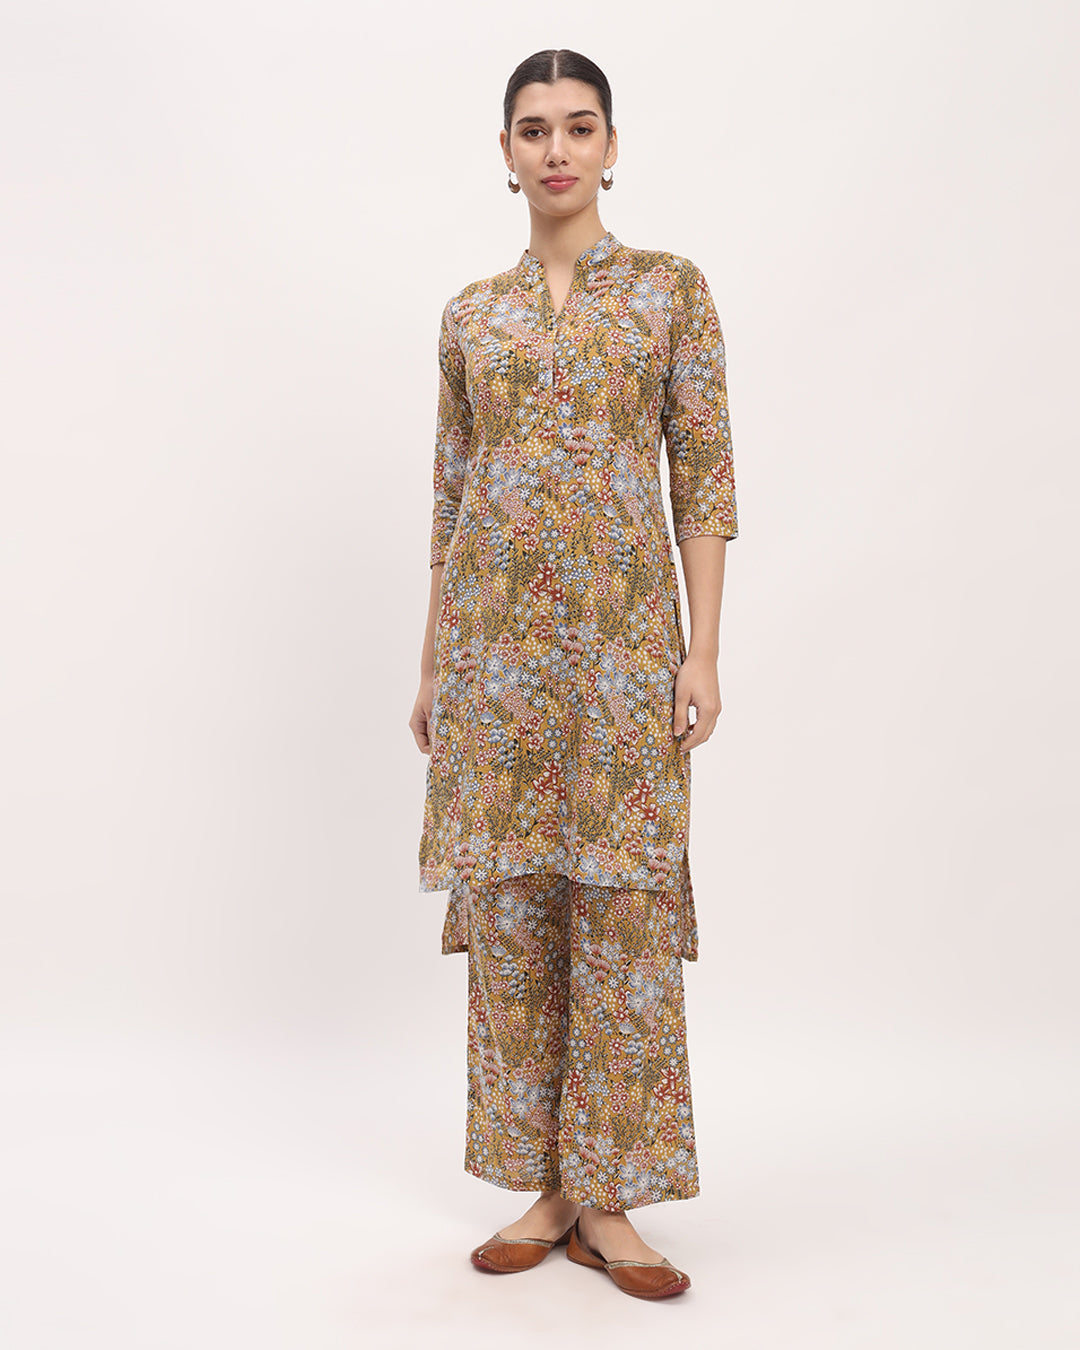 Combo: Golden Blossom & Fire Lillies High-Low Printed Kurta (Without Bottoms)